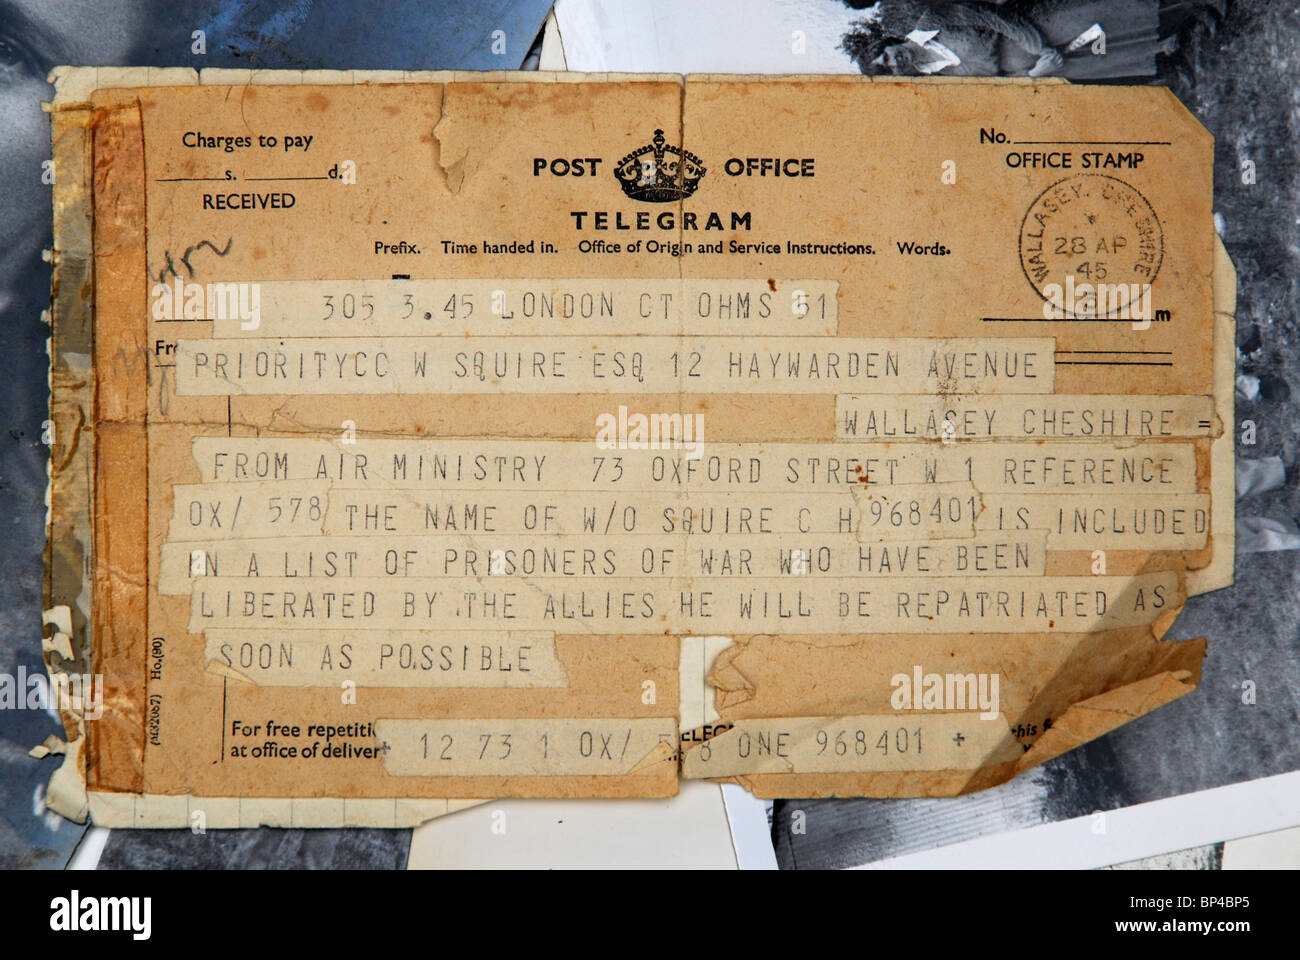 Telegram sent in WWII to notify of the liberation of POW RAF pilot Howard Squire from Germany. Stock Photo